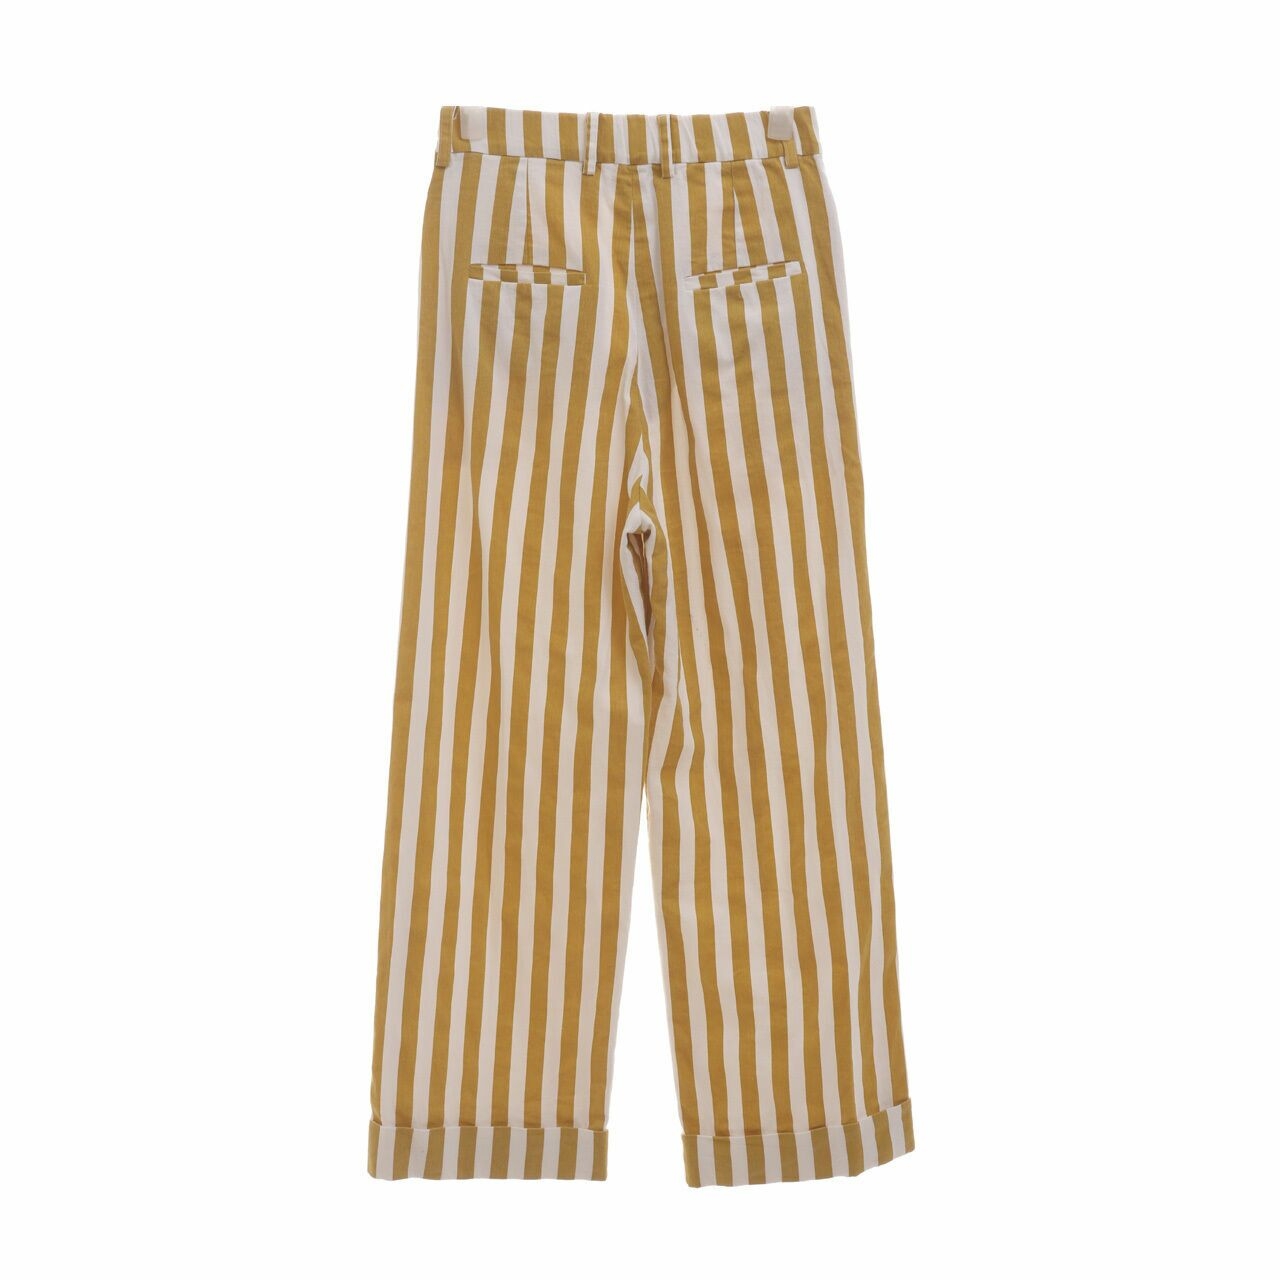 & Other Days White & Mustard Stripes Long Pants 